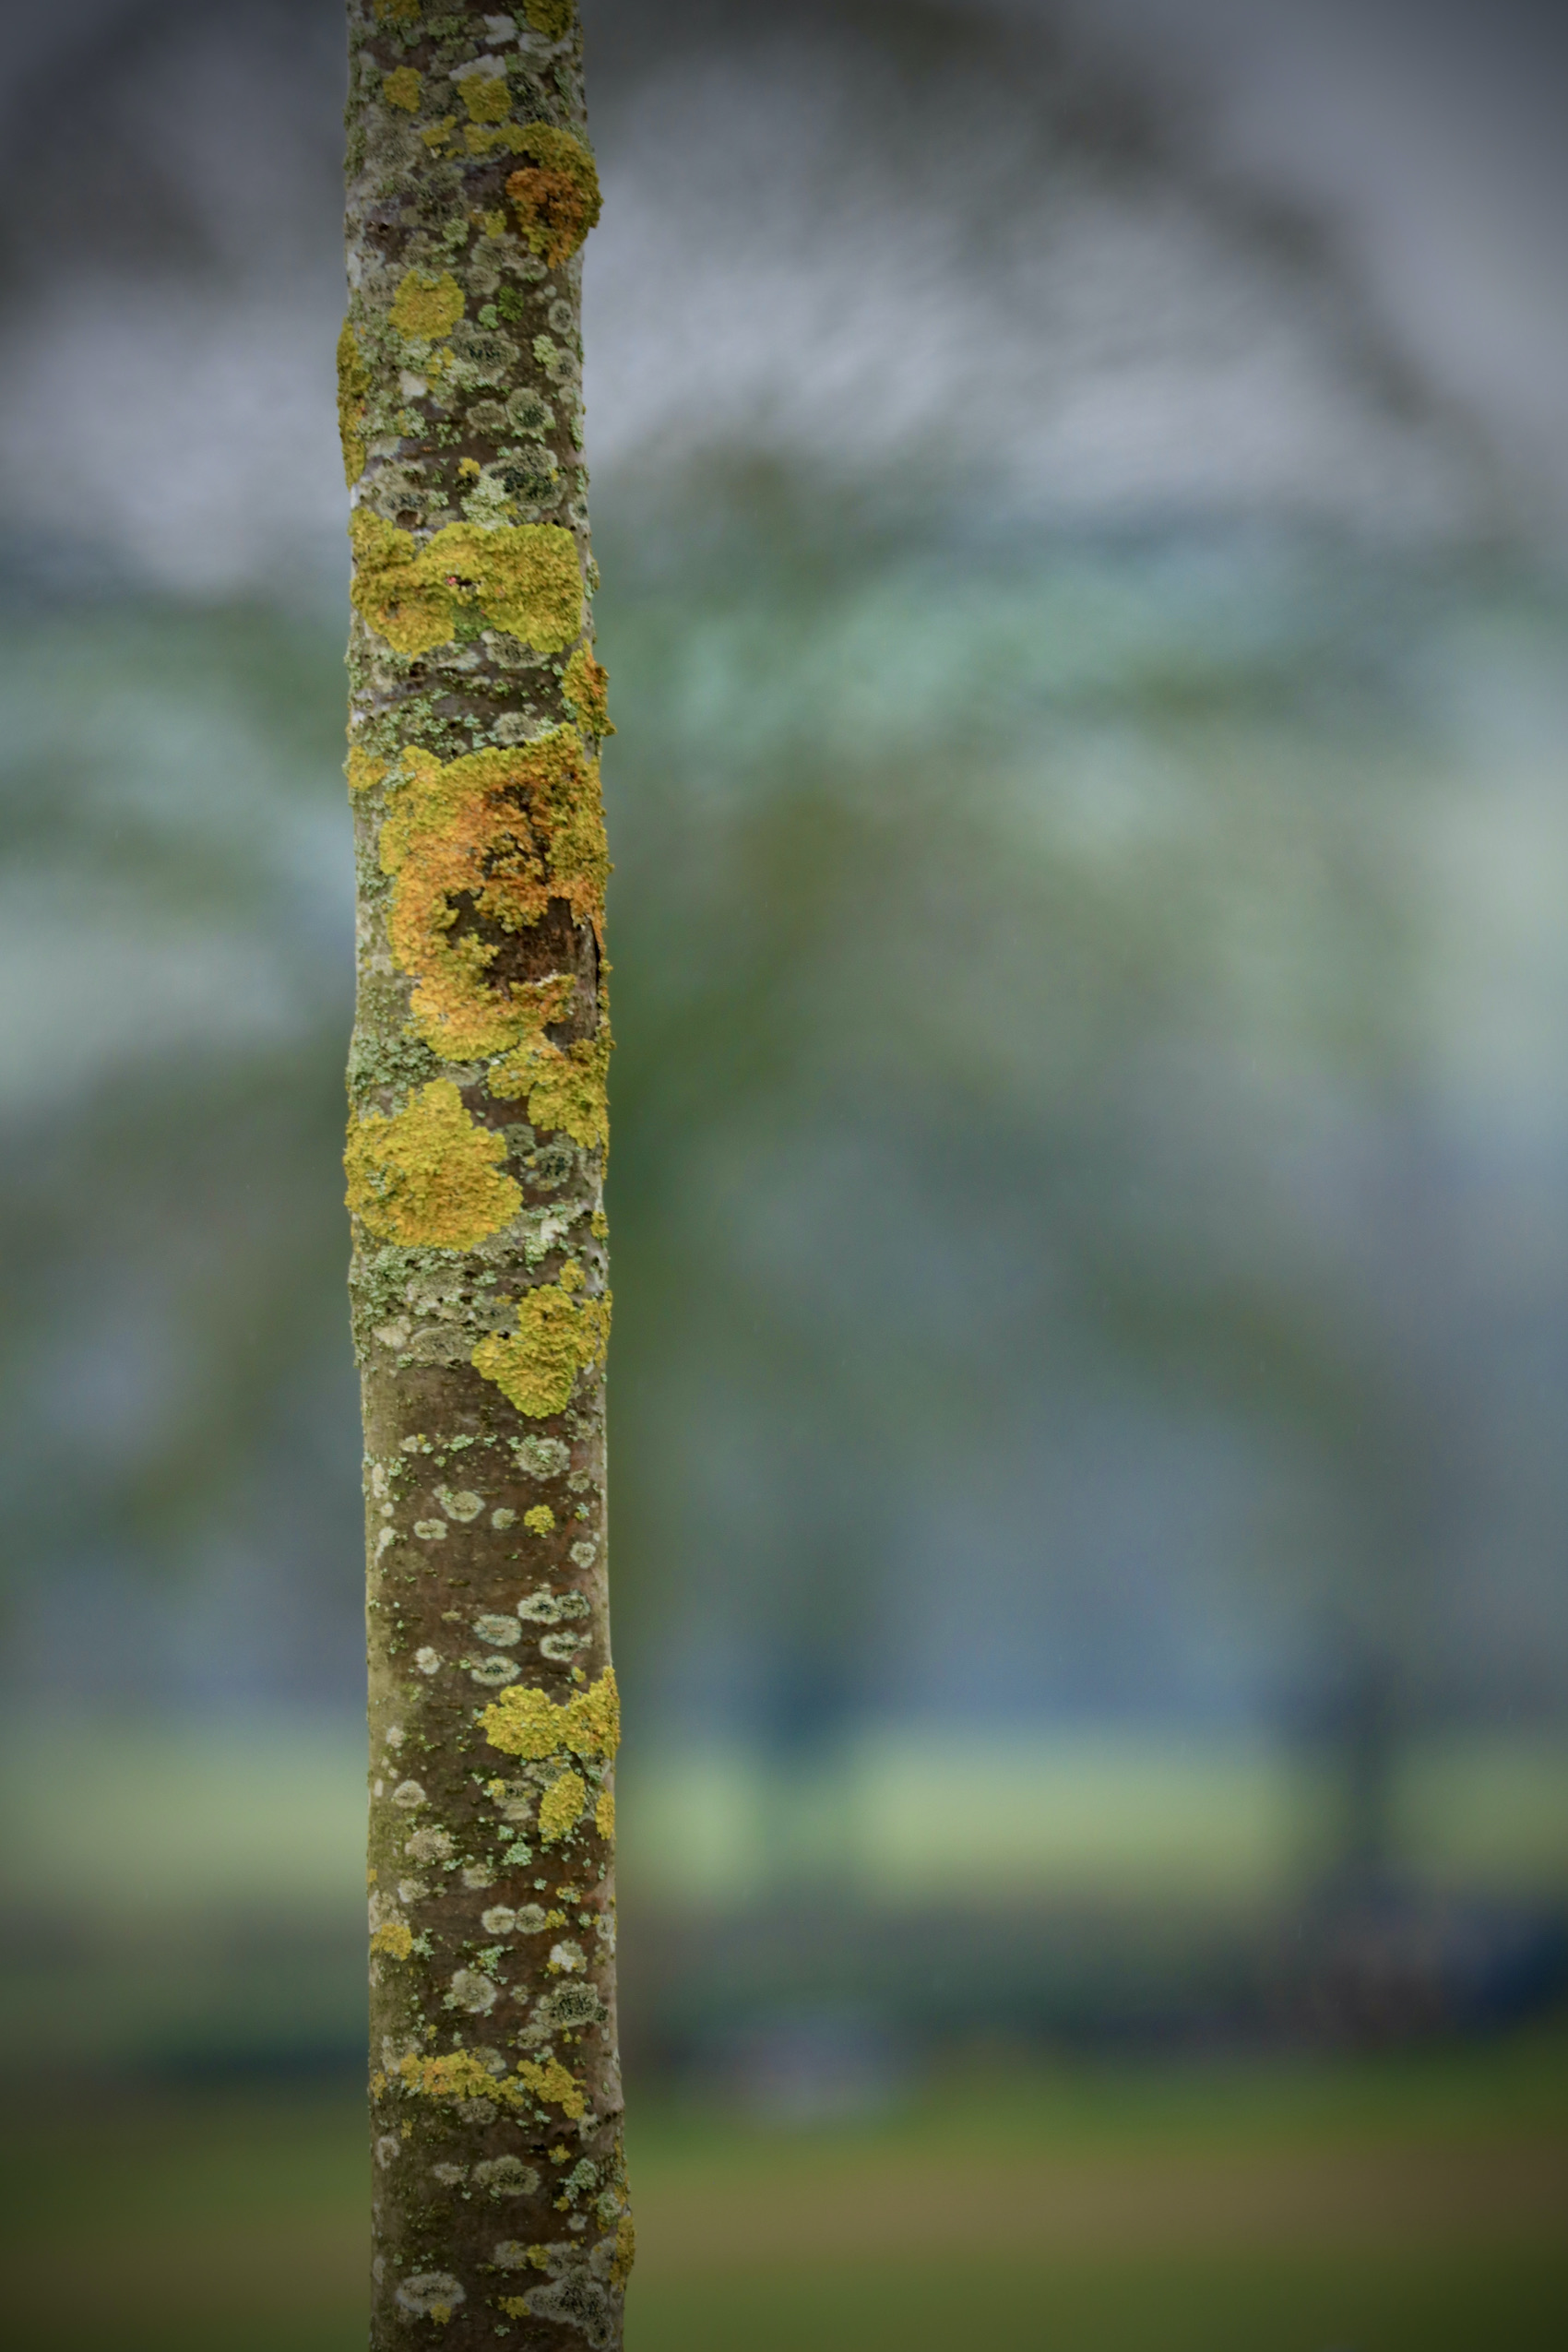 A tree trunk covered in lichen in cotswold garden